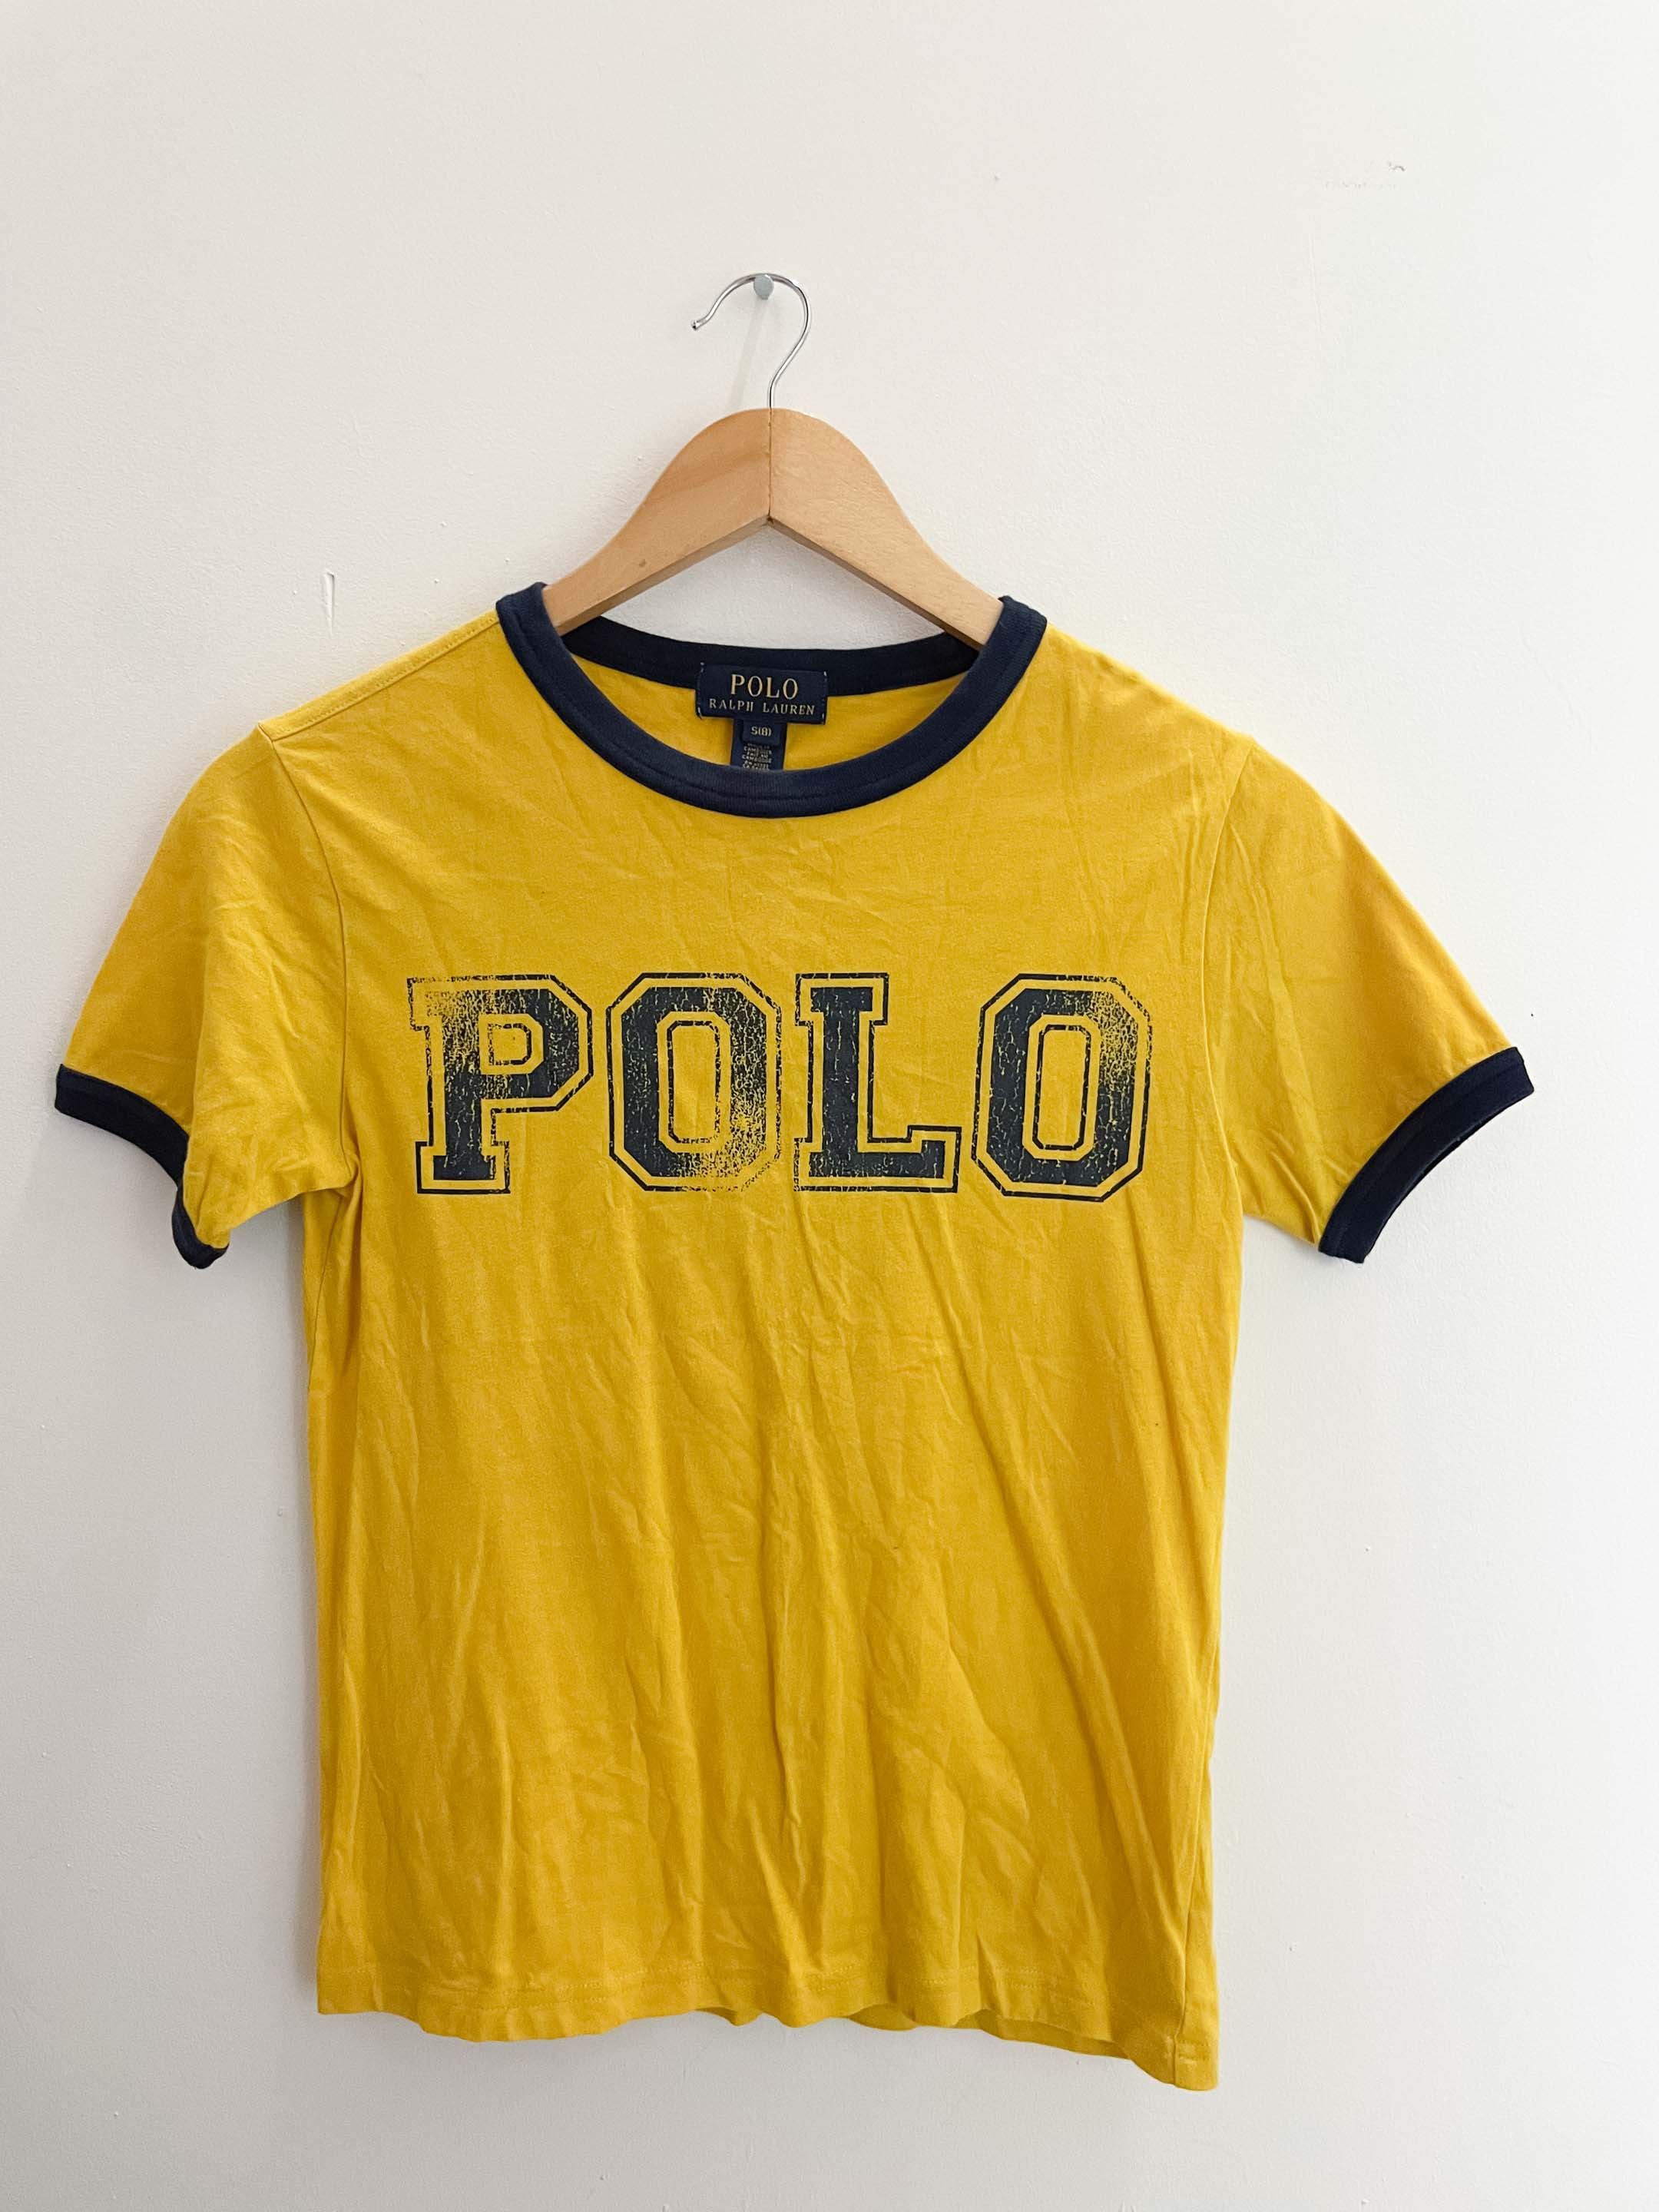 Vintage yellow polo ralph lauren with 68 crested at the back small Tshirt